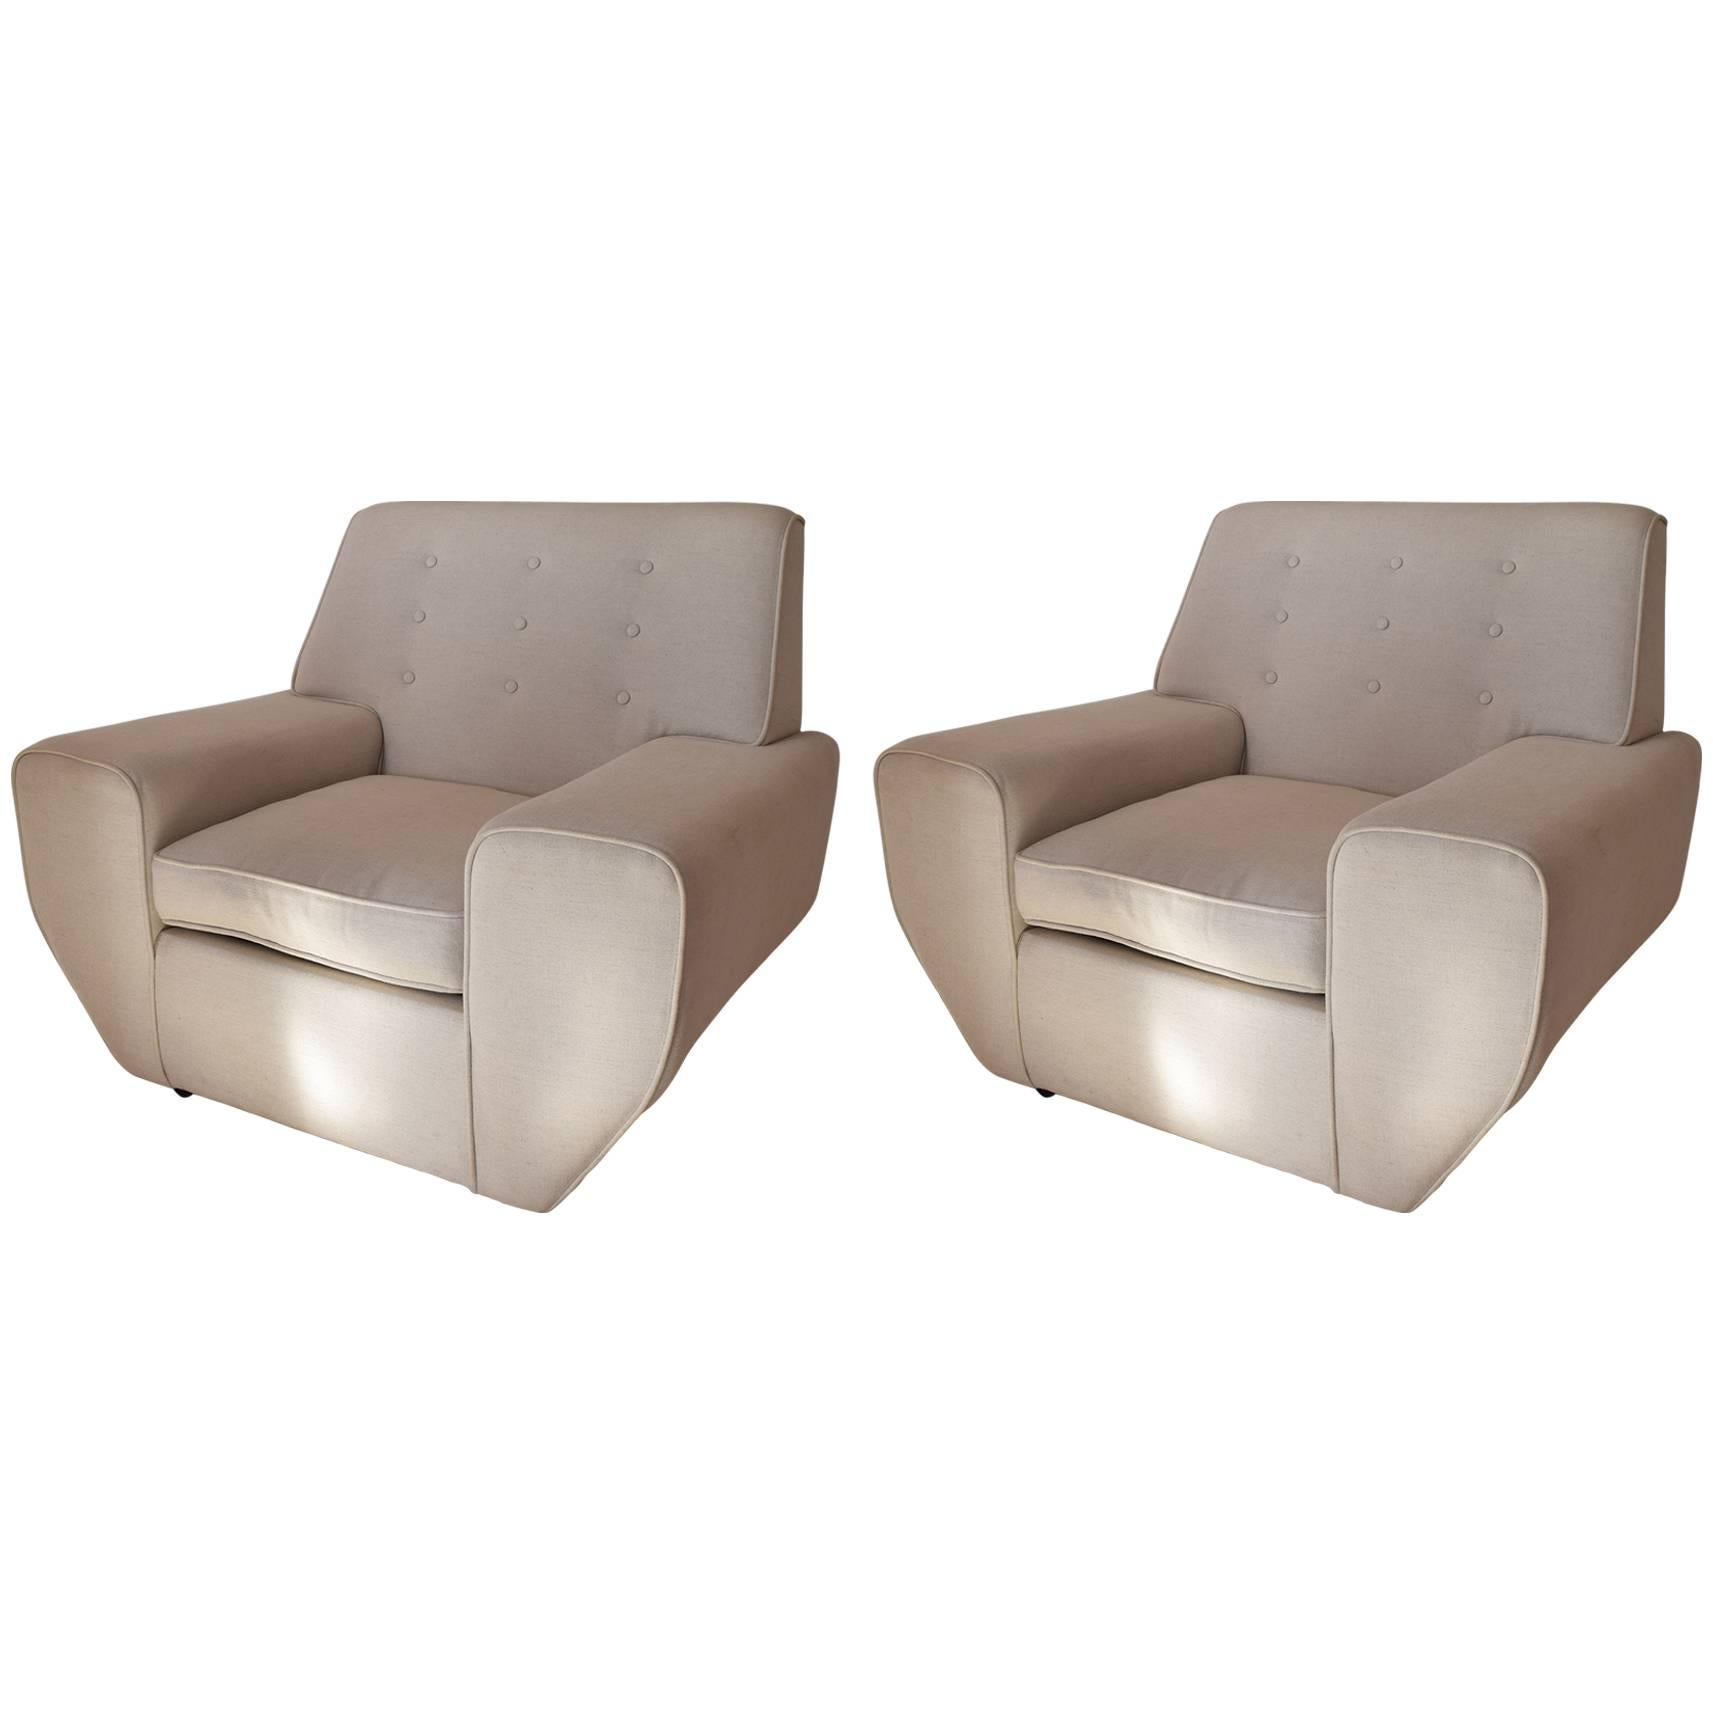 Pair of Geometric Cream Linen Upholstered Mid Century Lounge Chairs. 